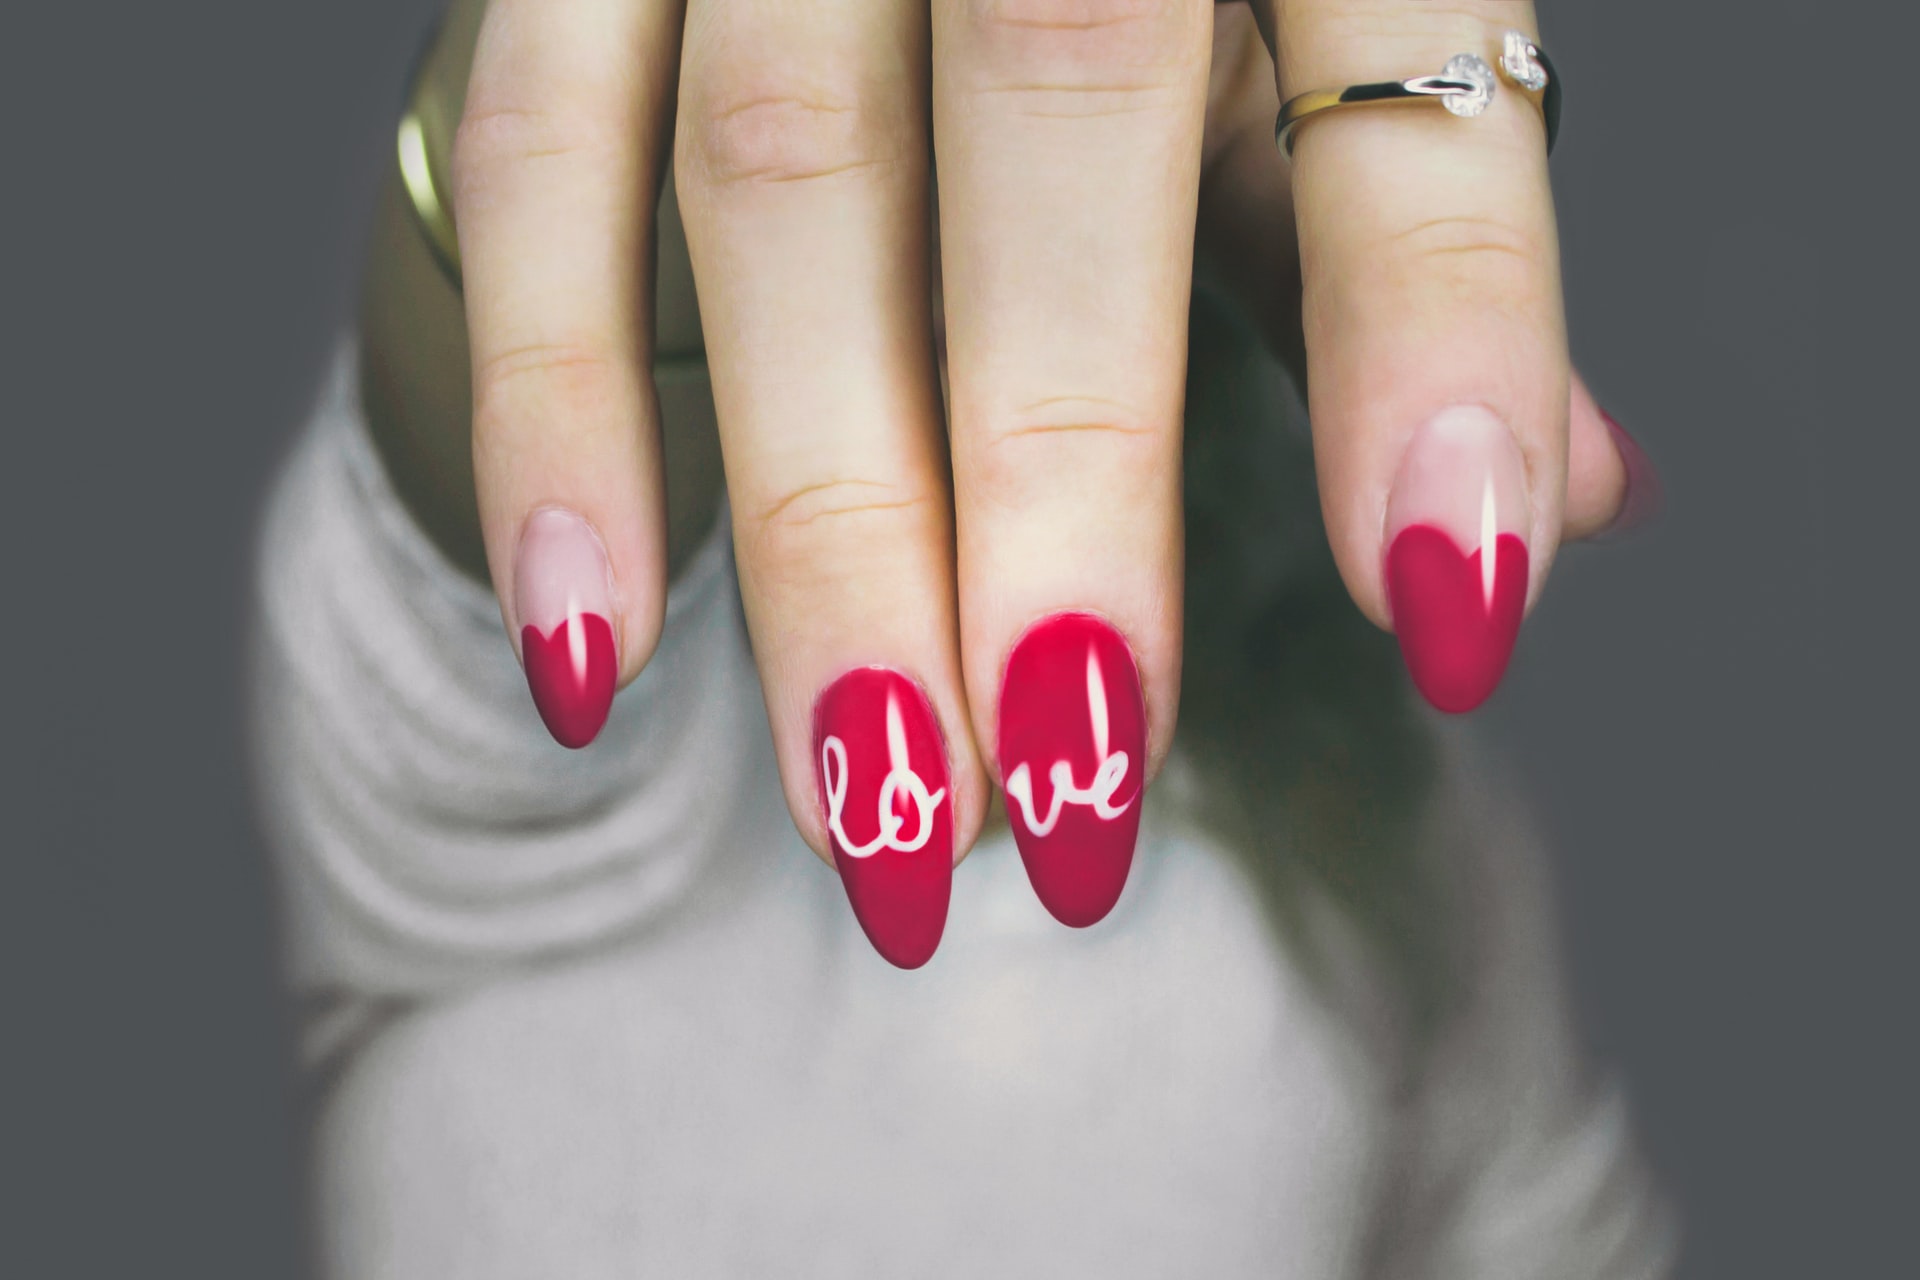 Woman with nail polish and love written on nails